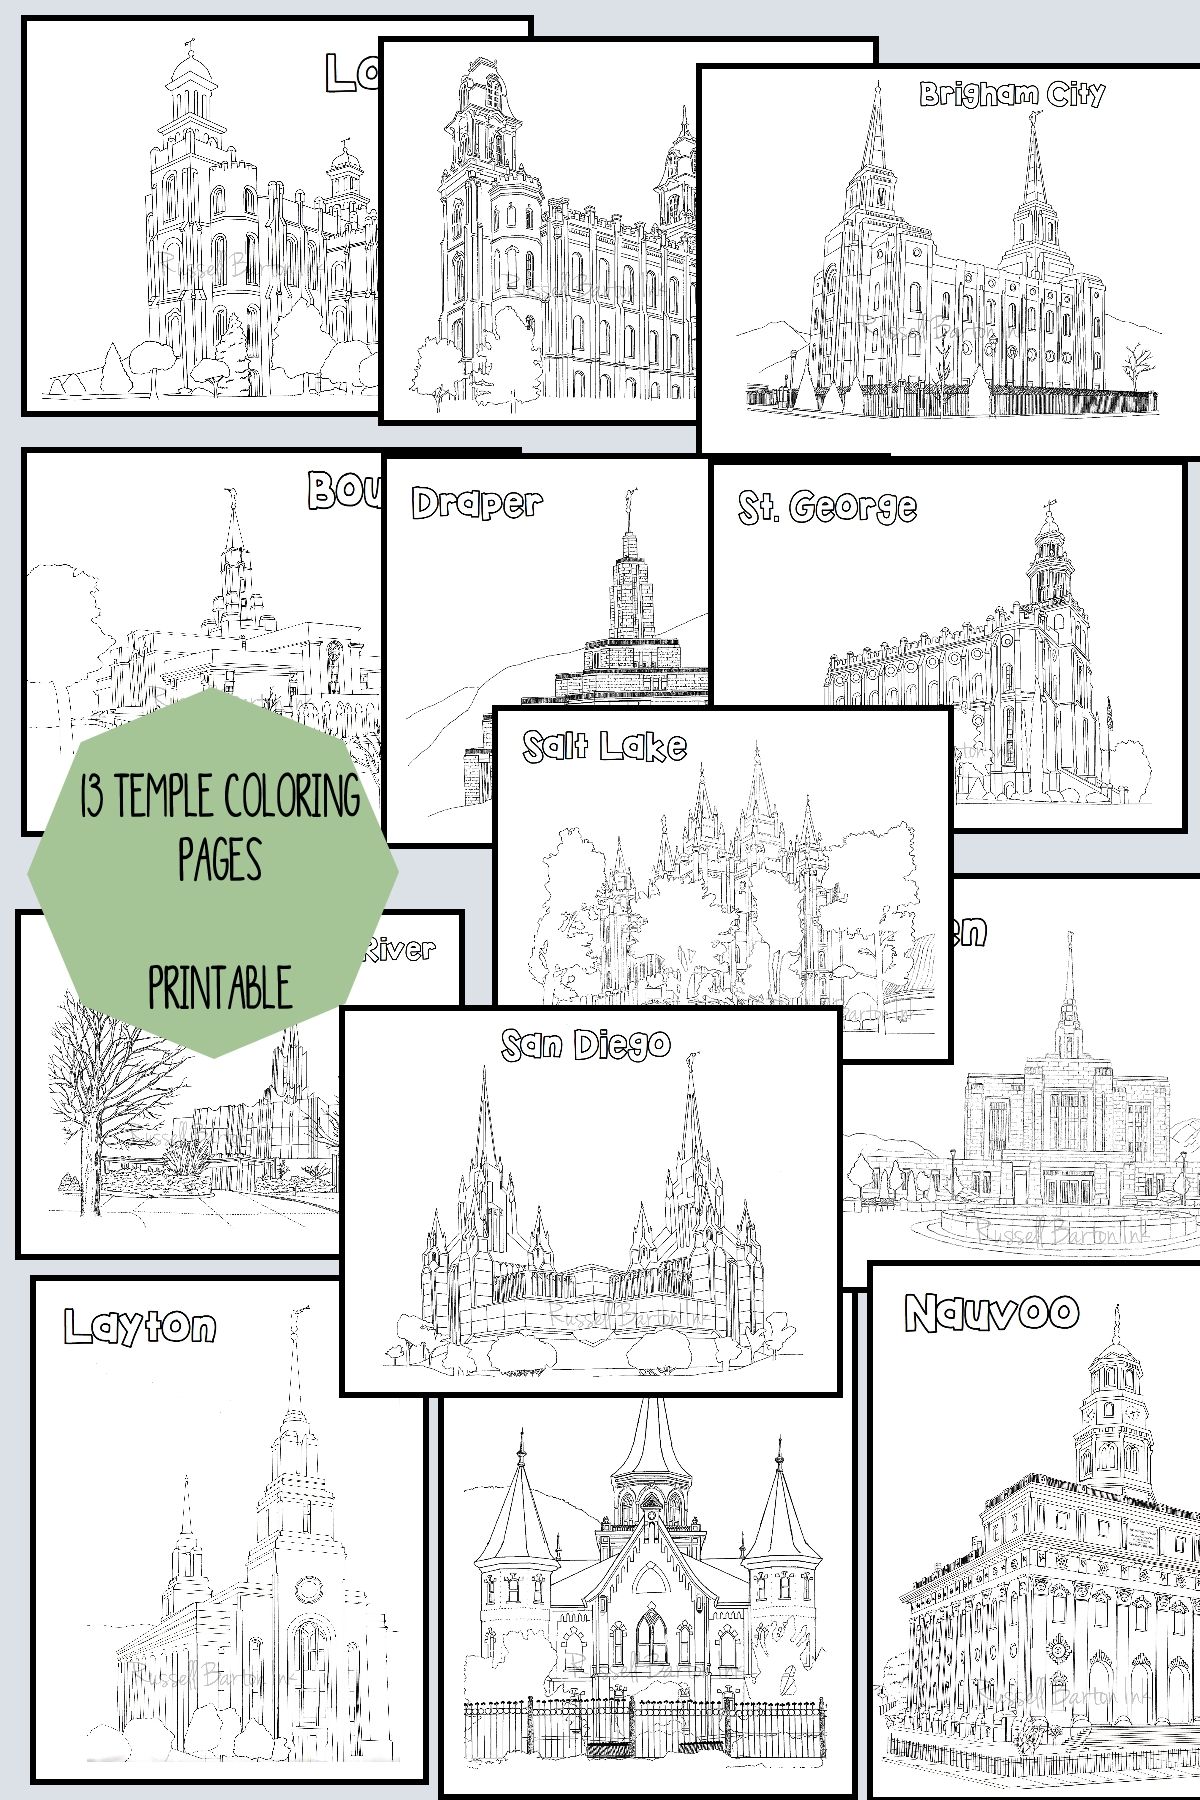 Lds coloring pages lds temple coloring pages lds primary